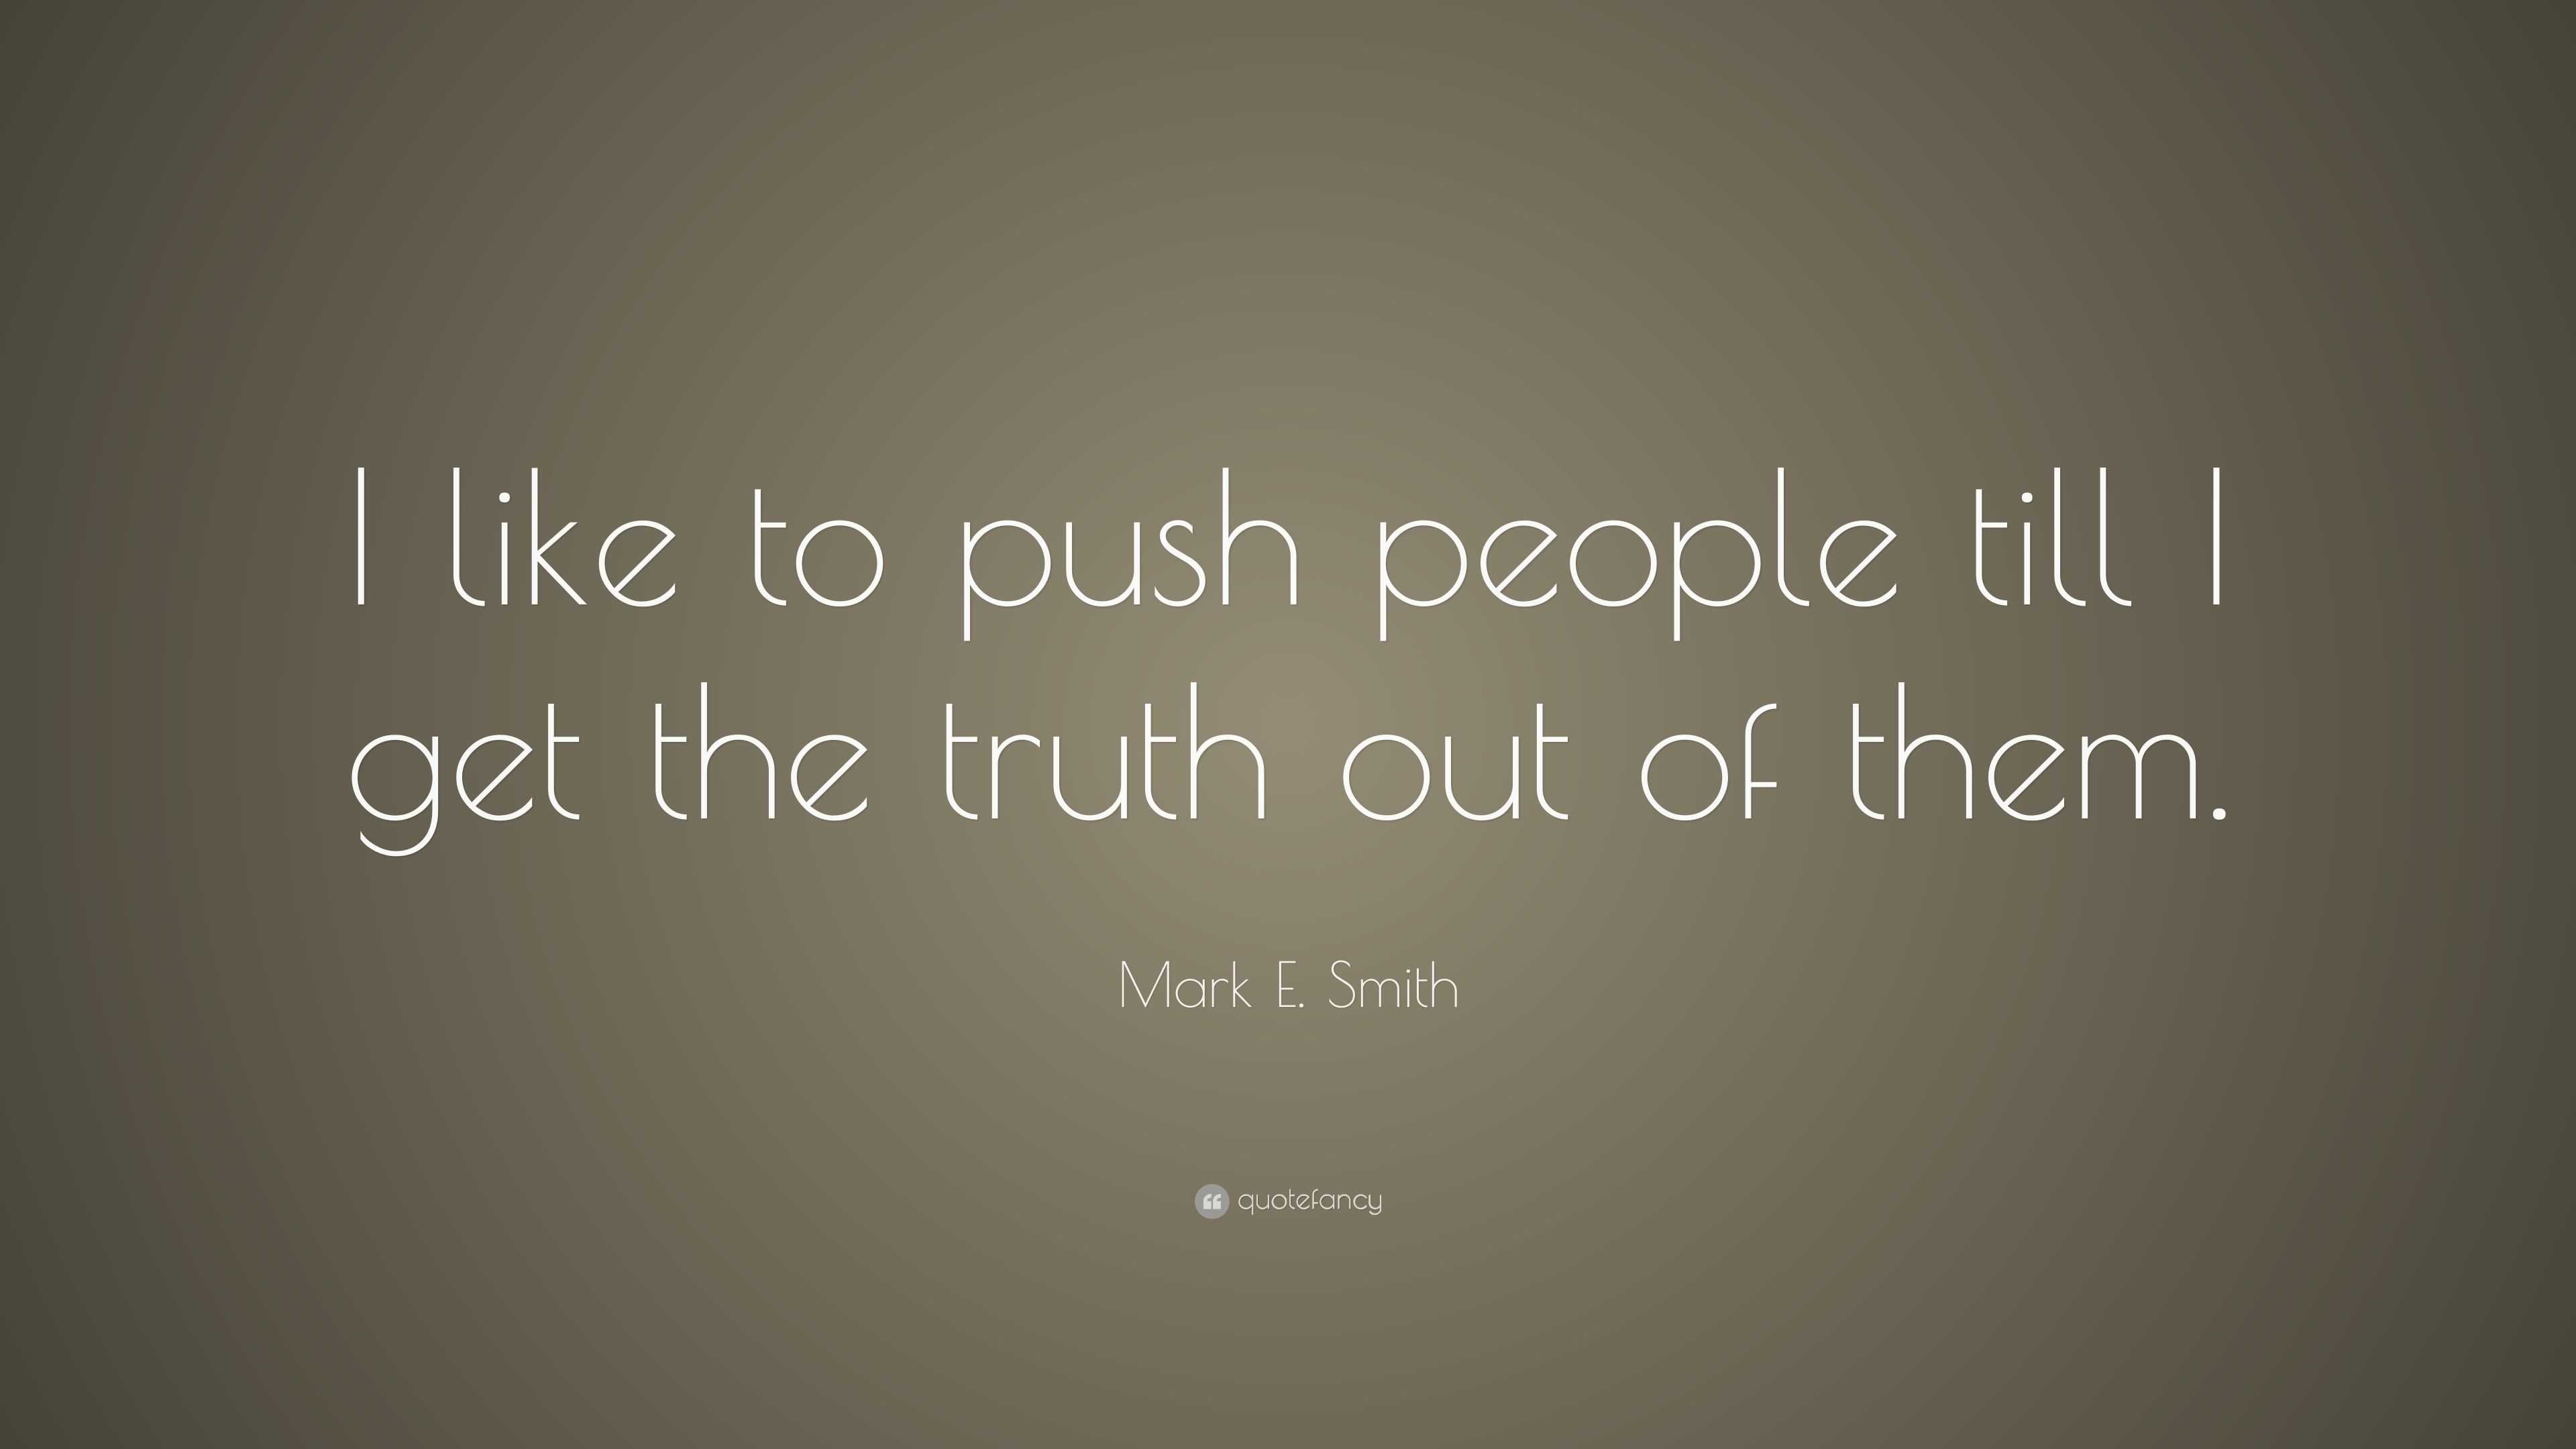 Mark E. Smith Quote: “I like to push people till I get the truth out of